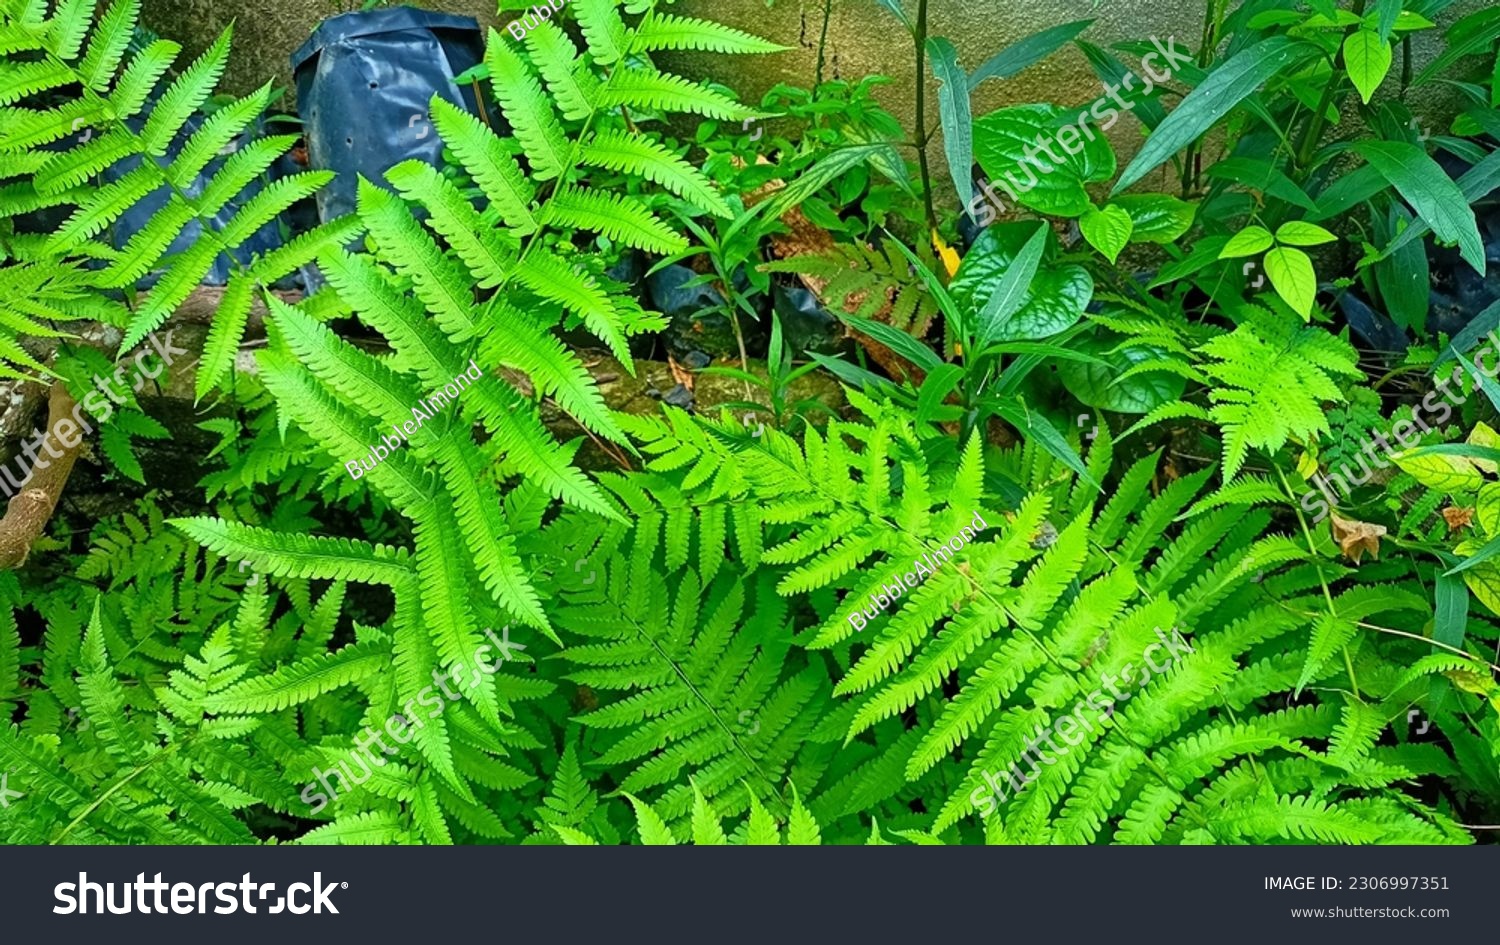 The ferns (Polypodiopsida or Polypodiophyta are a group of vascular plants (plants with xylem and phloem) that reproduce via spores #2306997351